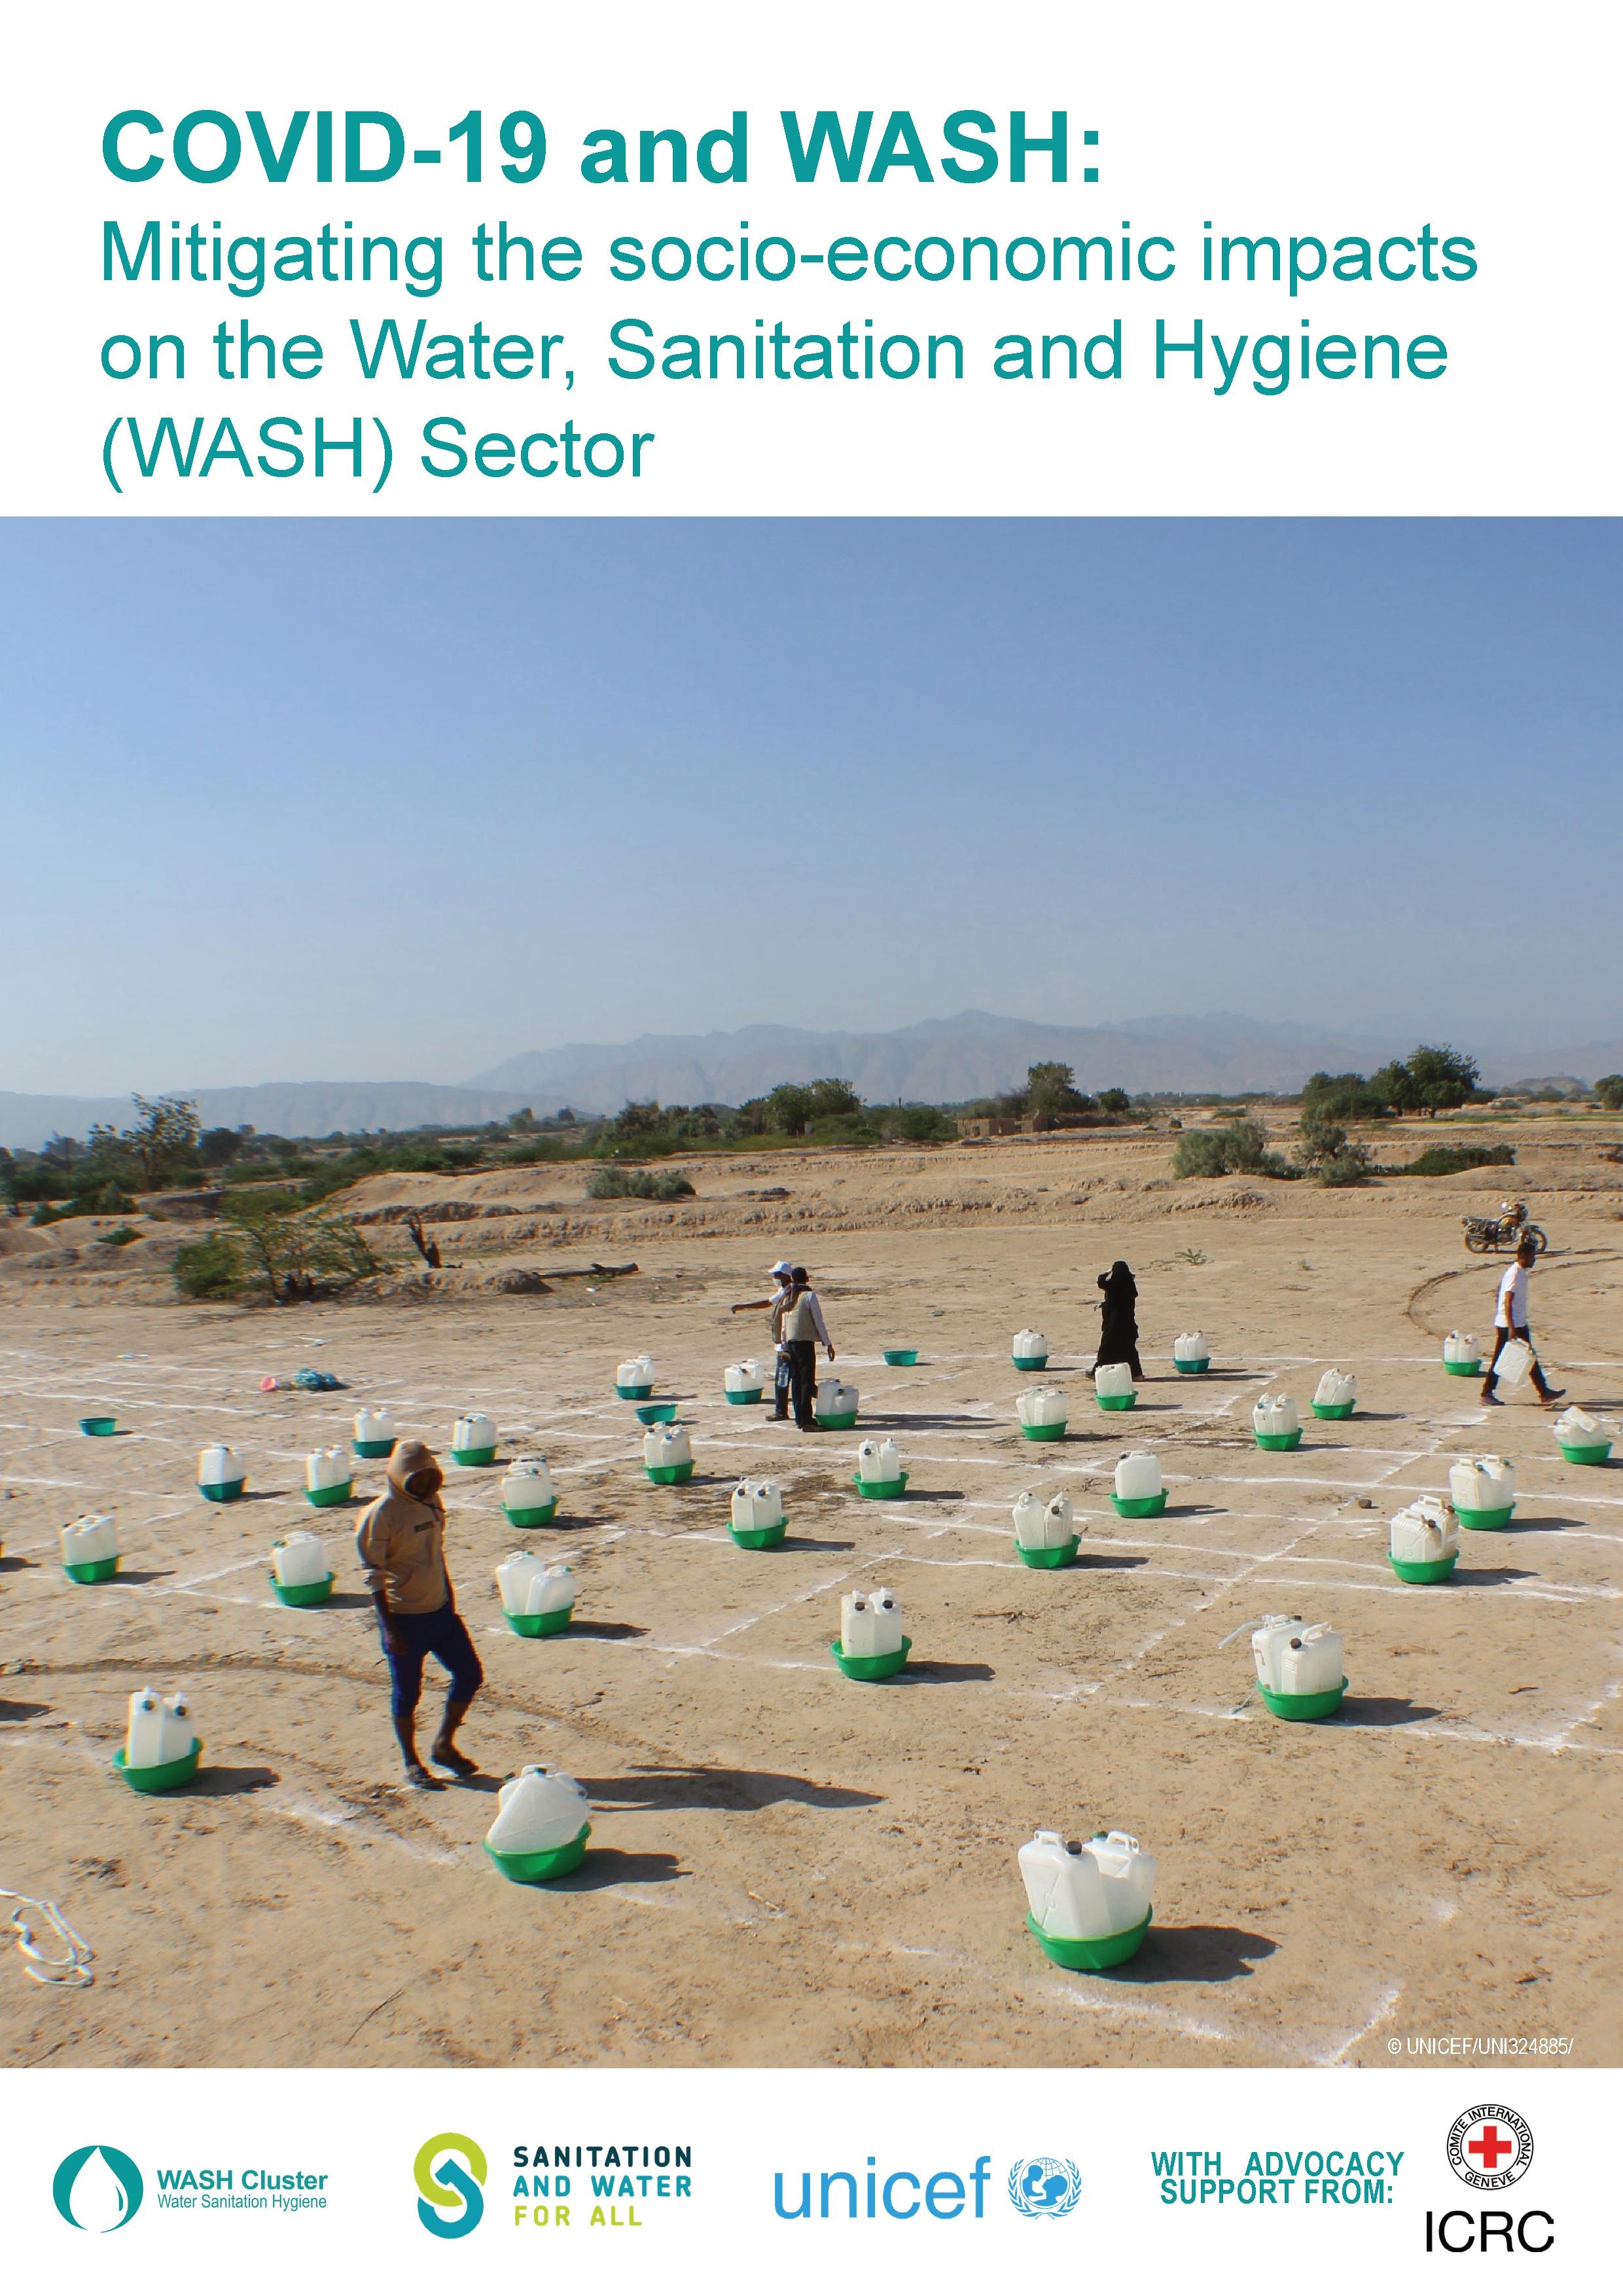 COVID-19 and WASH - Mitigating the socio-economic impacts on the Water, Sanitation and Hygiene (WASH) Sector